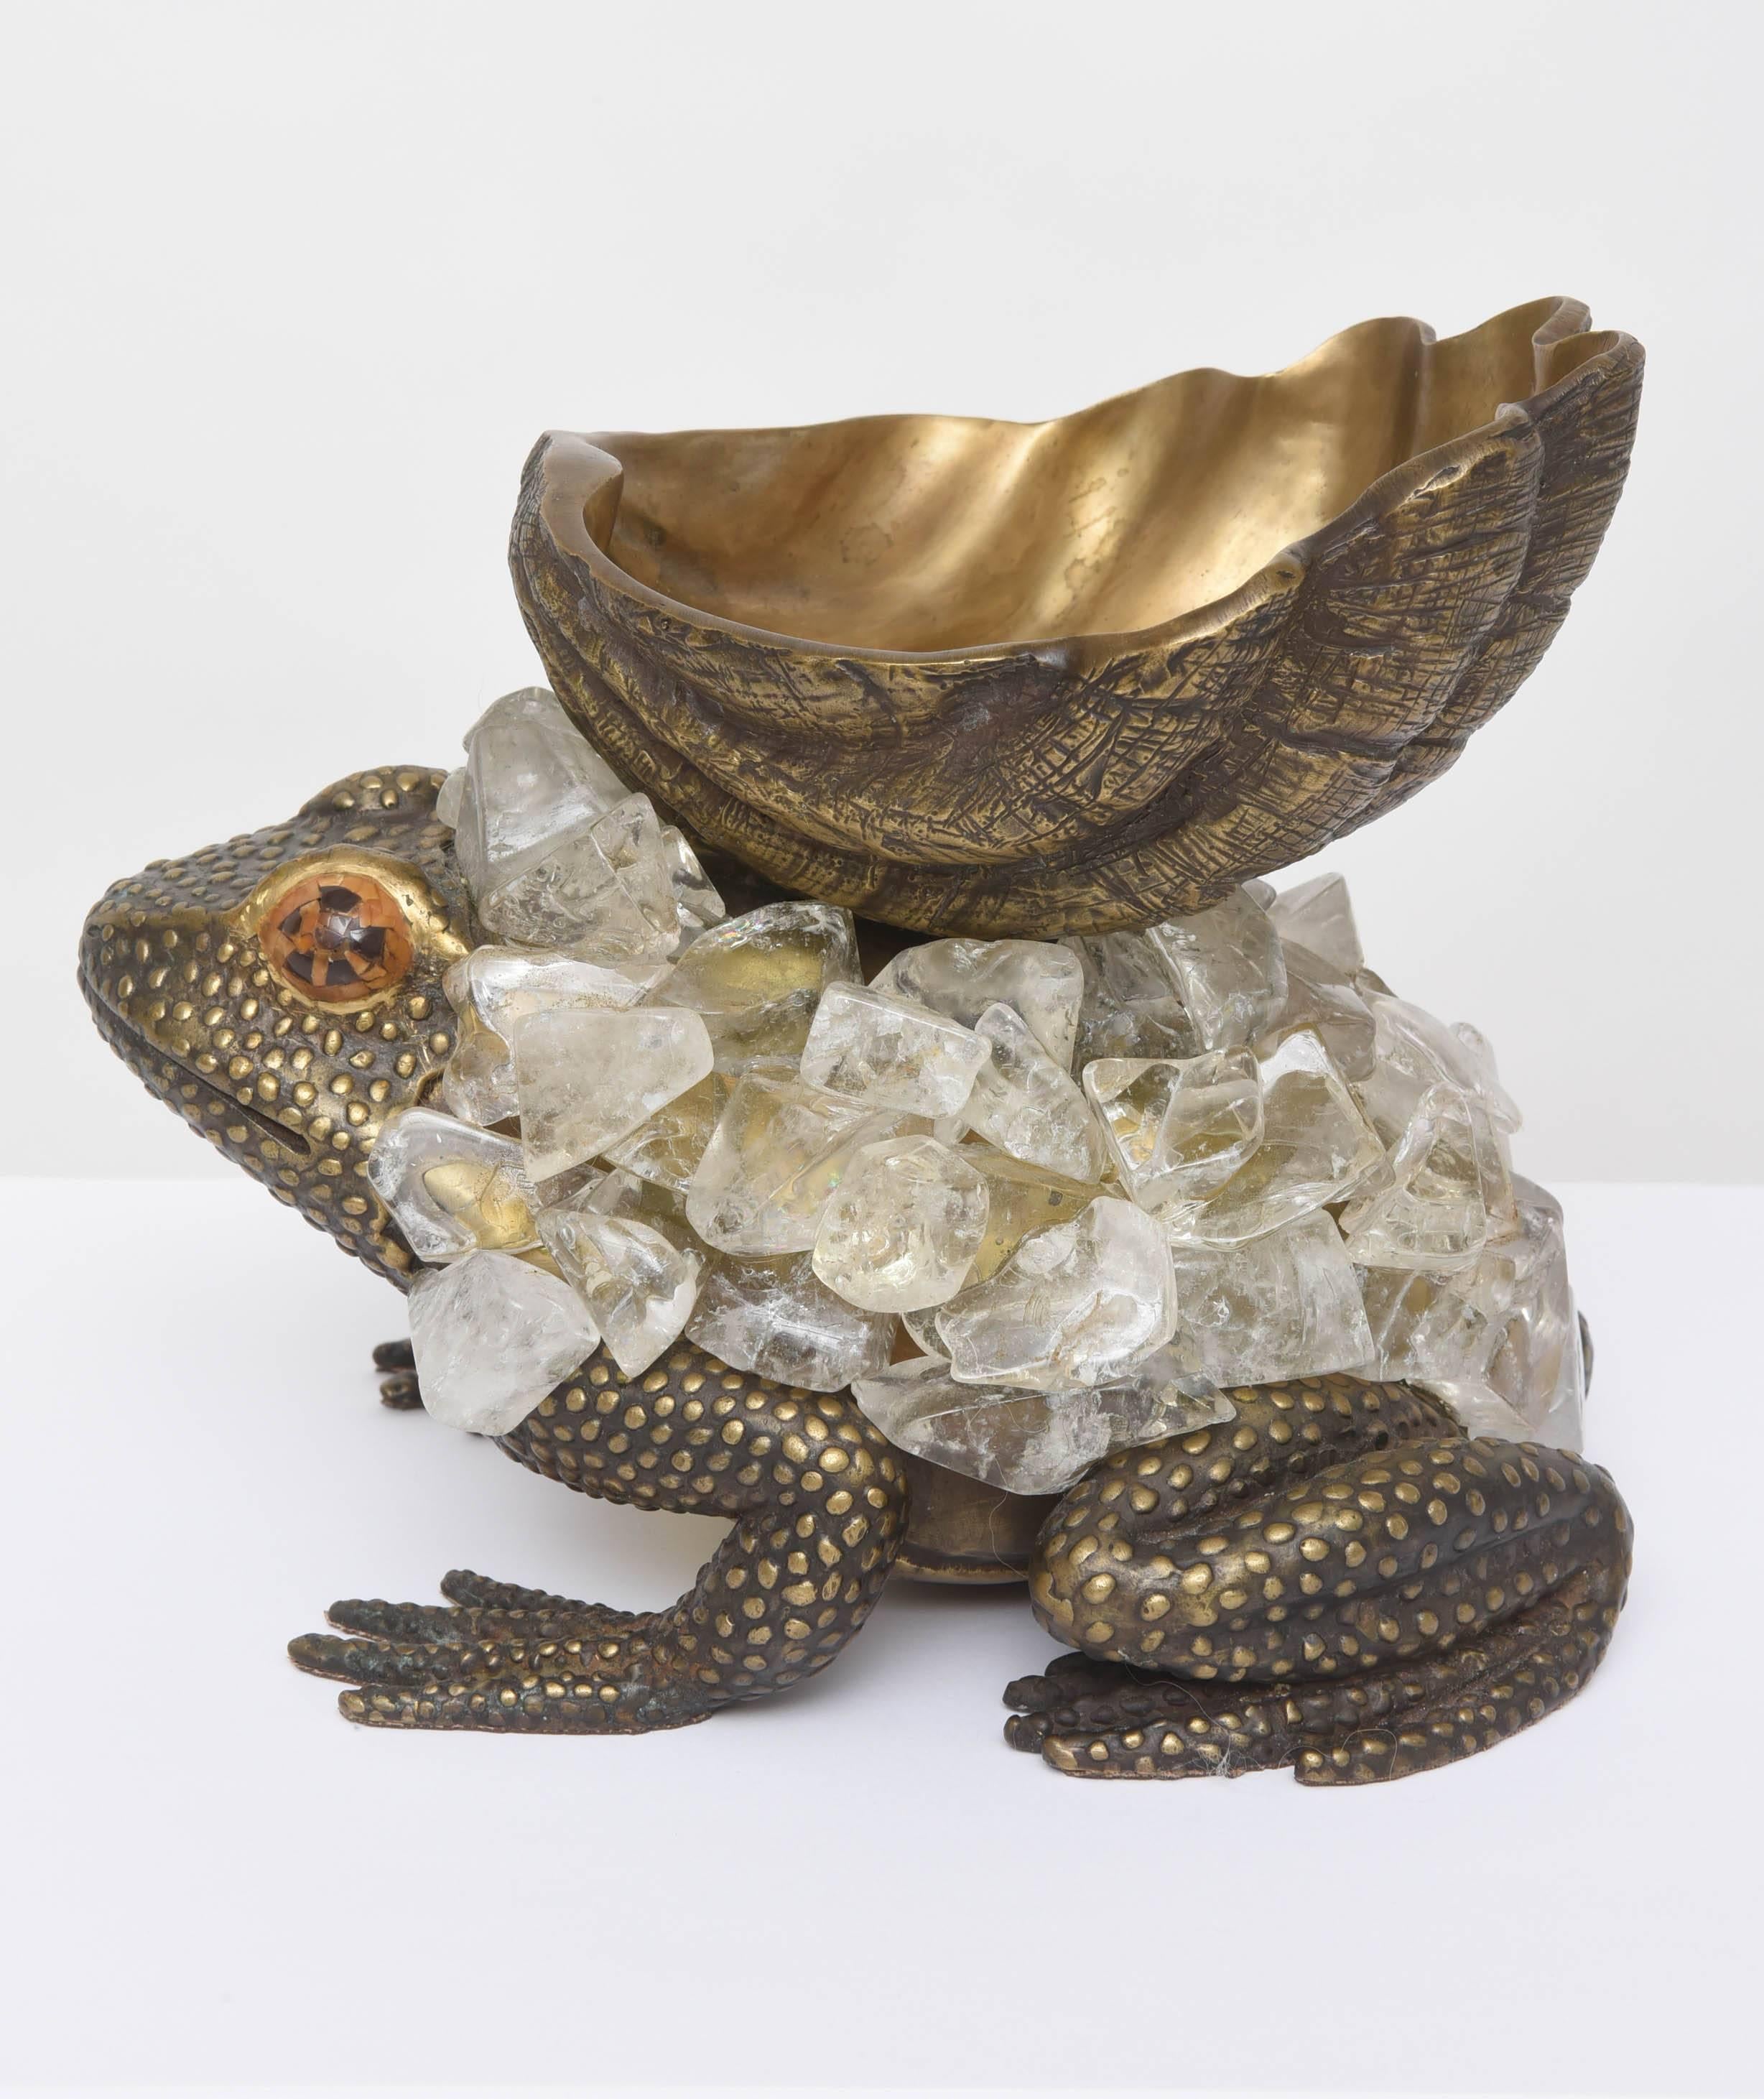 Bronze frog covered in crystals and holding an upturned shell that serves as a bowl.